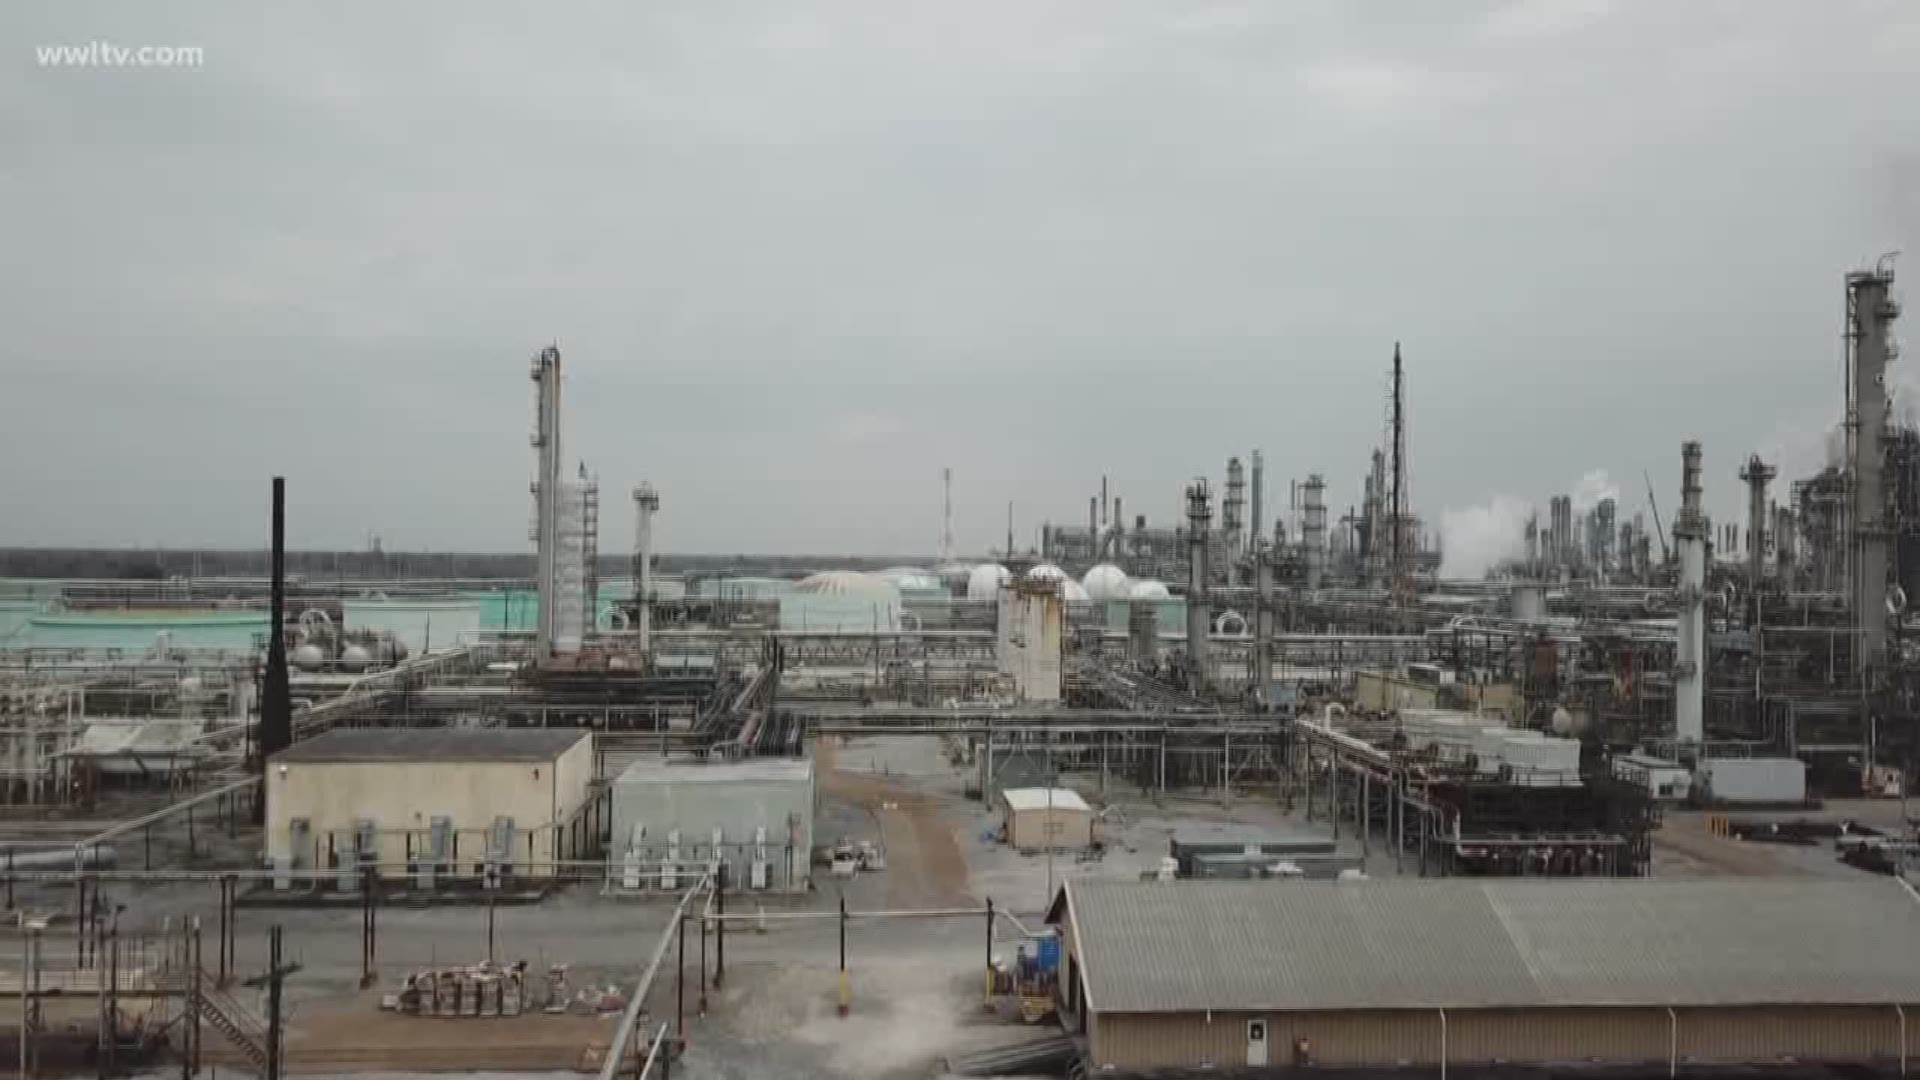 The seven-parish corridor between metro New Orleans and Baton Rouge is home to at least 83 chemical plants and the federal government has found it has some of the highest toxic emissions in the U.S.